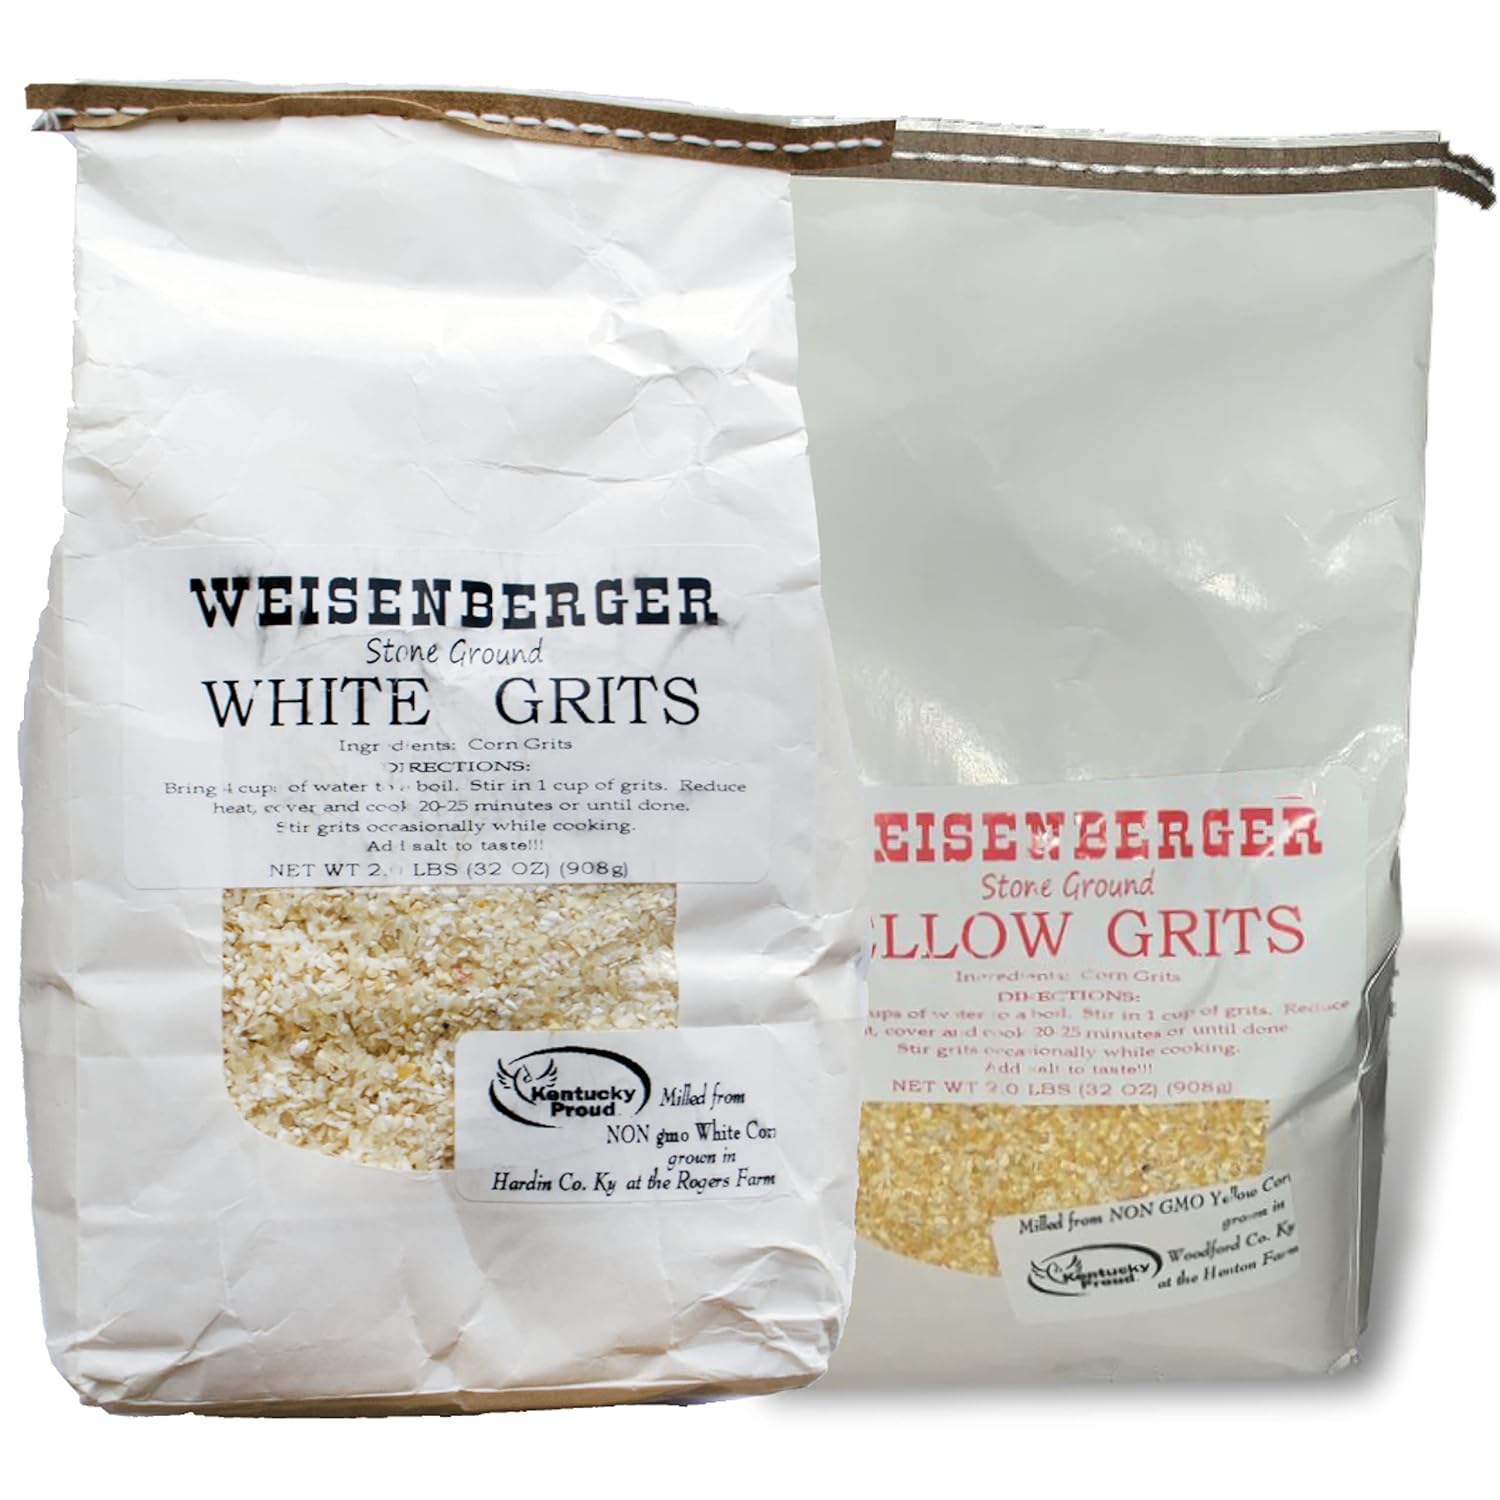 Weisenberger Stone Ground Grits - Authentic, Old Fashioned, Southern Style Corn Grits - Local Kentucky Proud Product - Non GMO Course Ground Cornmeal Grits - White and Yellow, 2 lb - 2 Pack